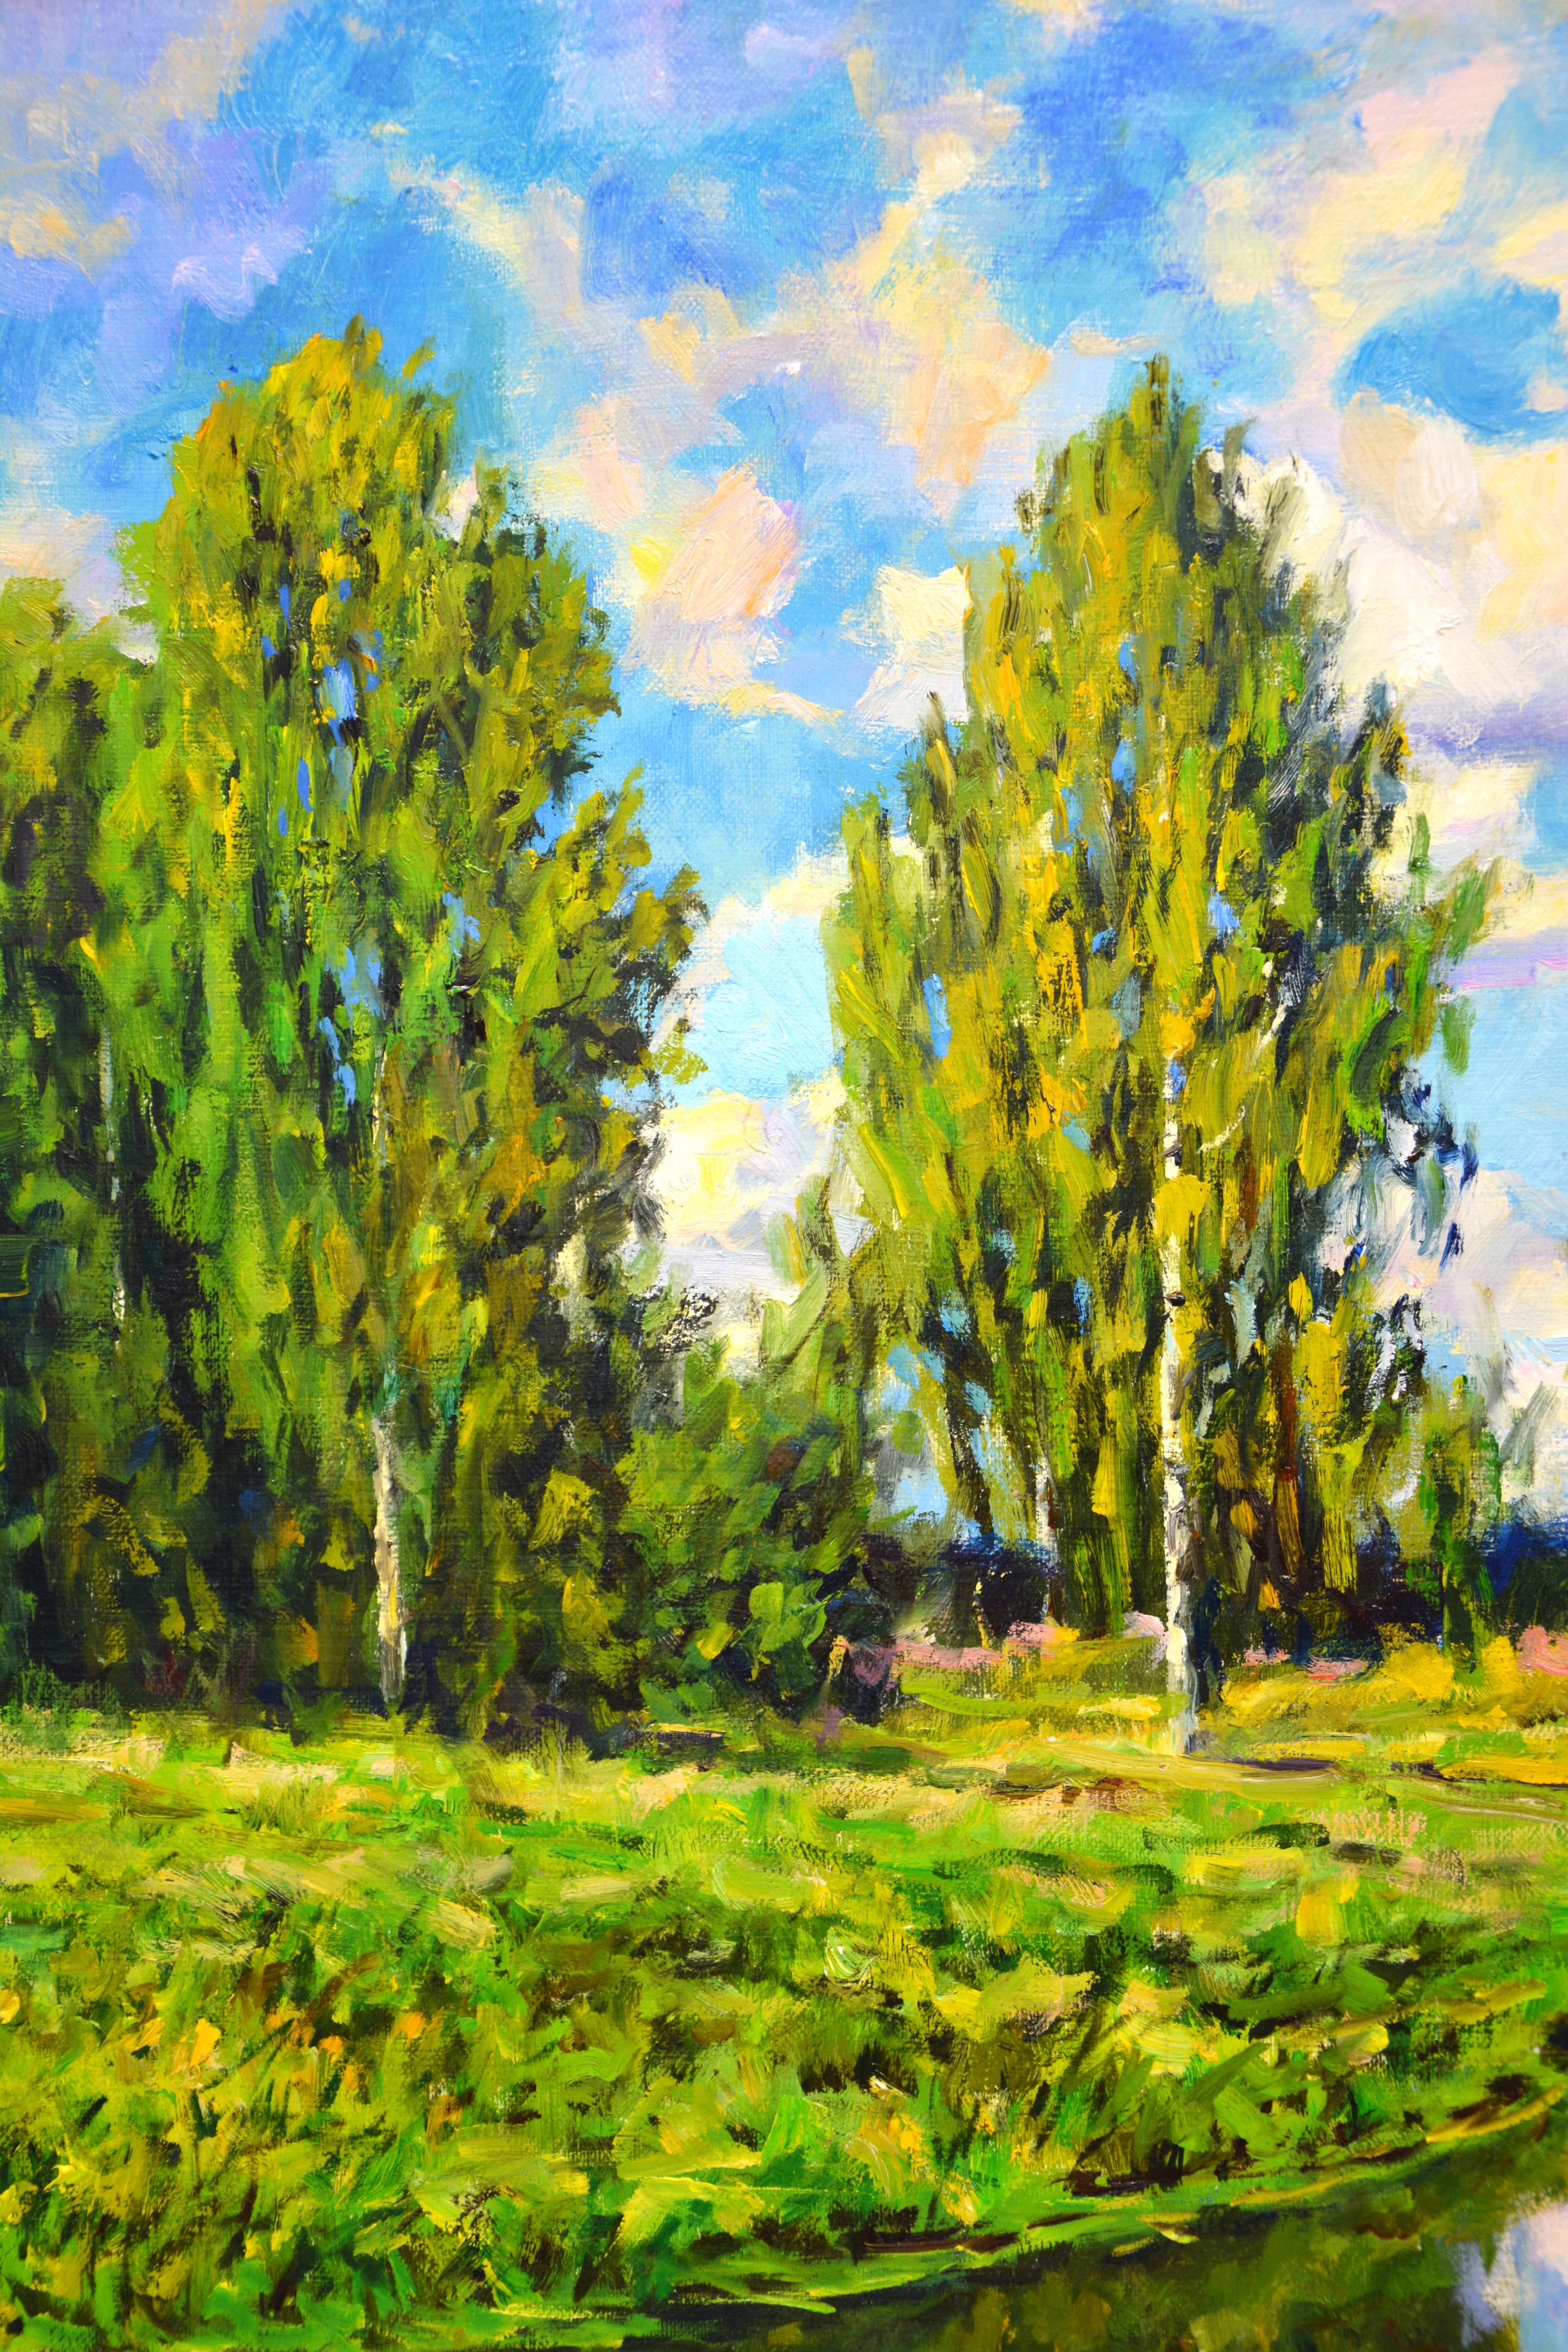 Picture. August. The saturated palette of greenery, the reflection of the sky in the water, birch trees, grass, clouds, a beautiful summer day evoke a feeling of love and gratitude to nature. The picture has good spatial quality, and the colors